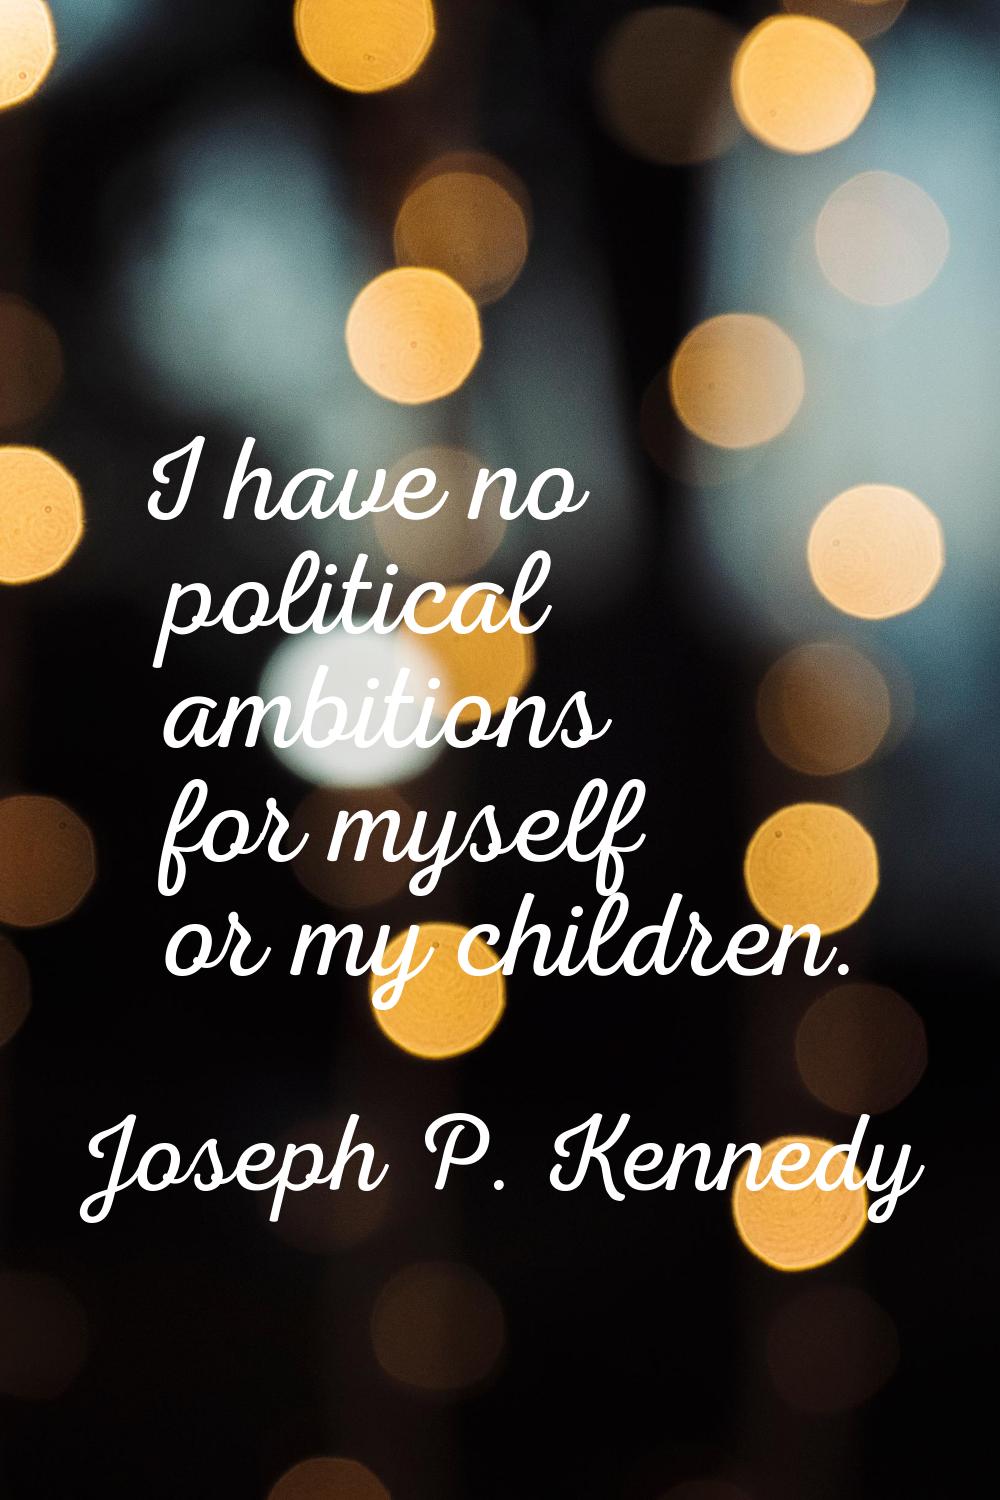 I have no political ambitions for myself or my children.